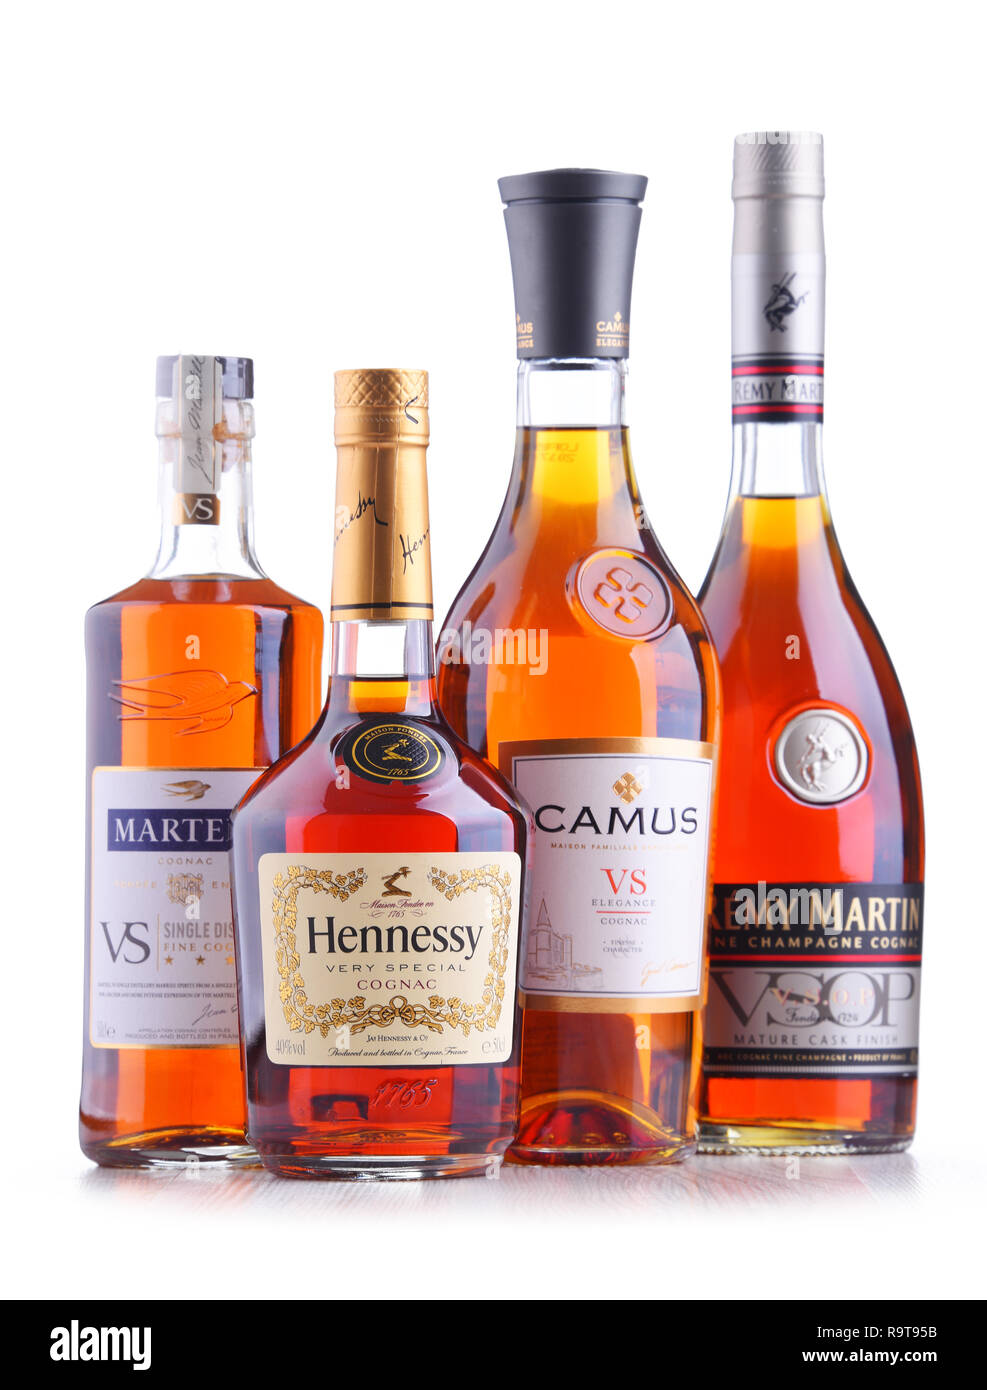 Groene bonen slaaf Patch POZNAN, POL - SEP 27, 2018: Bottles of famous Cognac brands including  Martell, Camus, Hennessy and Remy Martin Stock Photo - Alamy